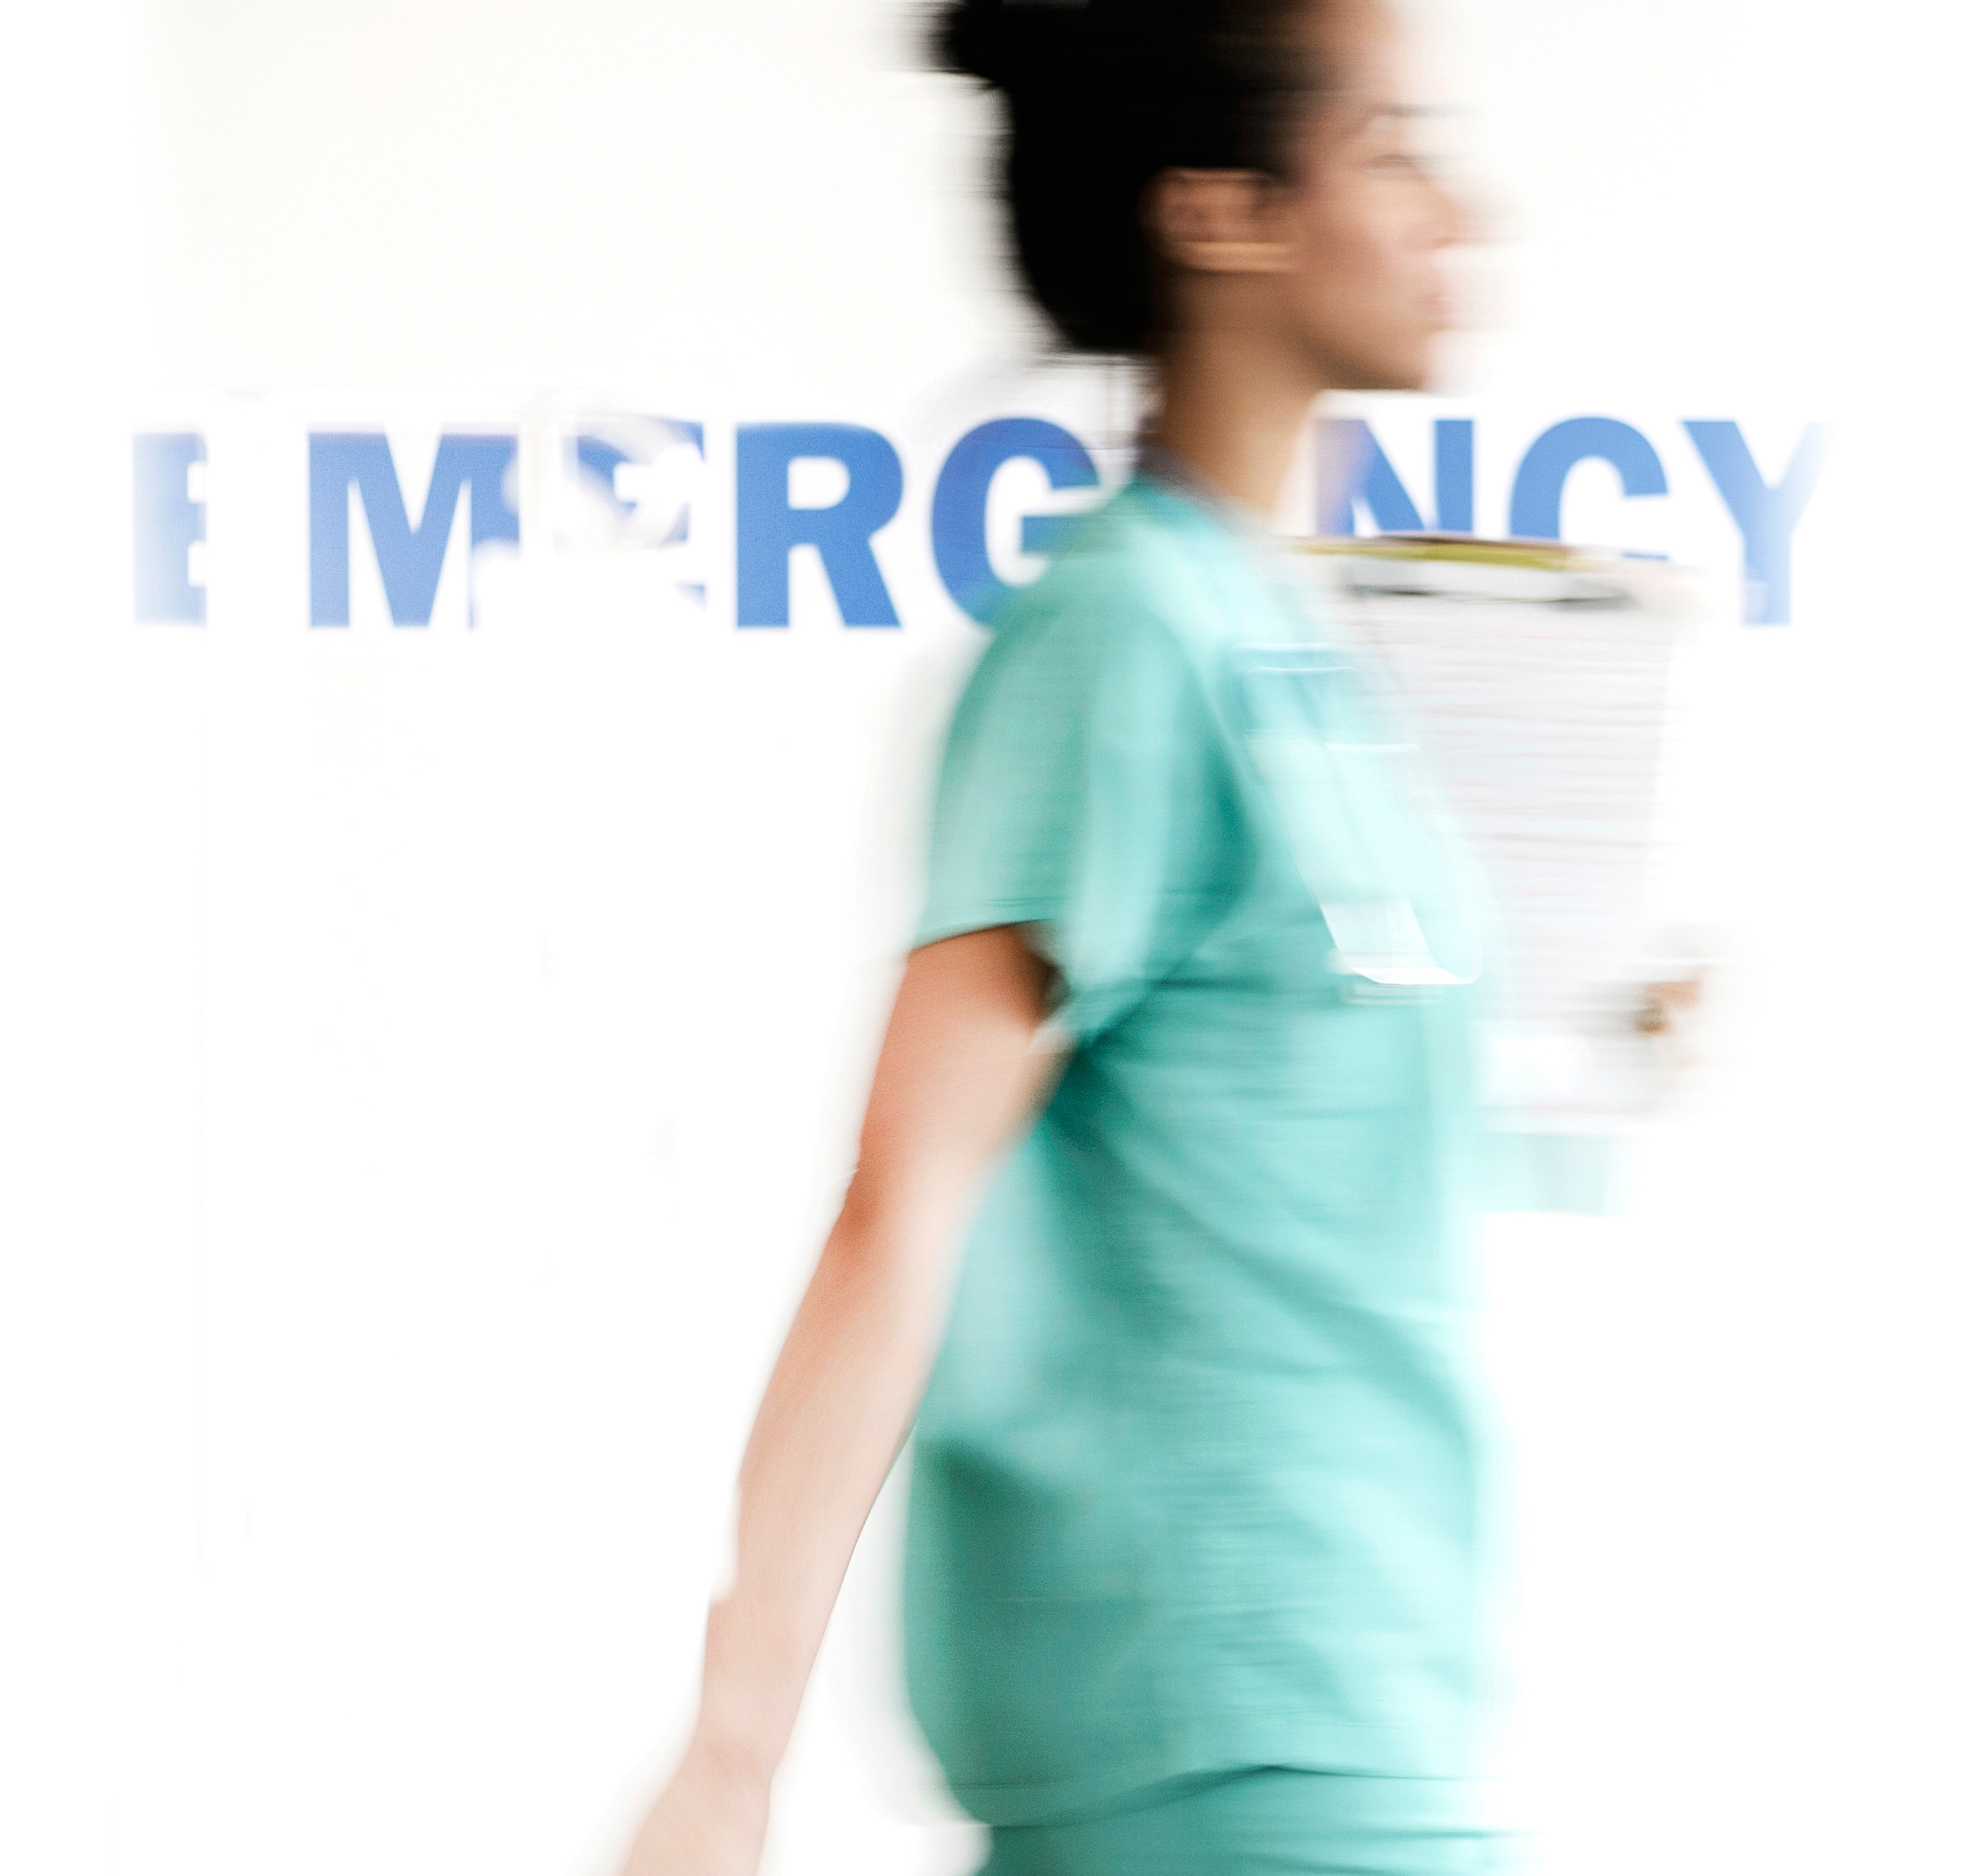 Healthcare professional walking past a wall that says "EMERGENCY"